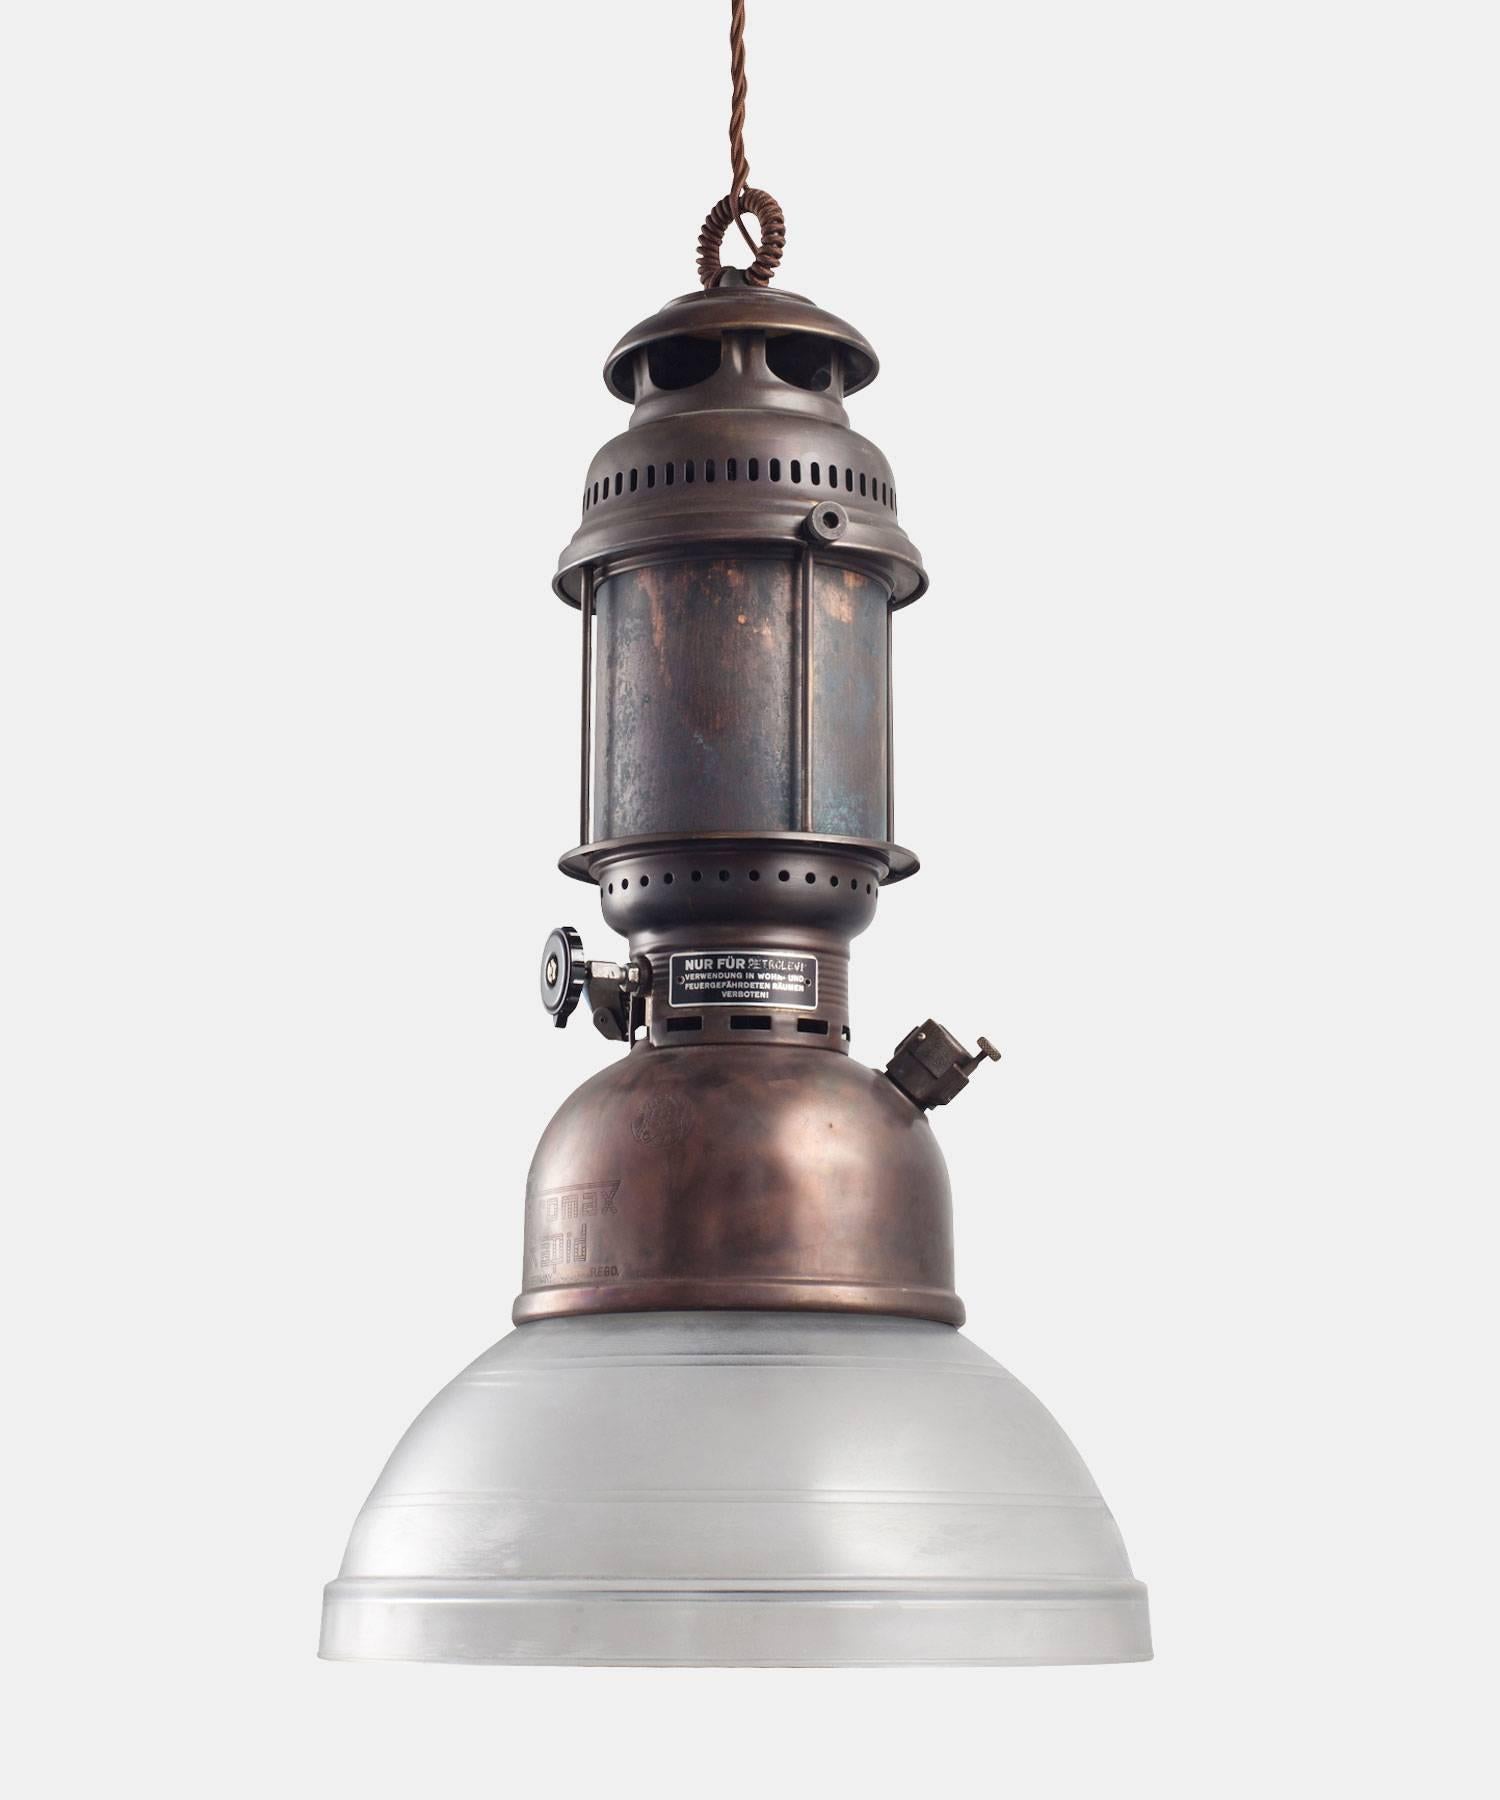 Antique gas light converted to electric, with a frosted glass shade. Industrial era Italian design with 4-week lead time.